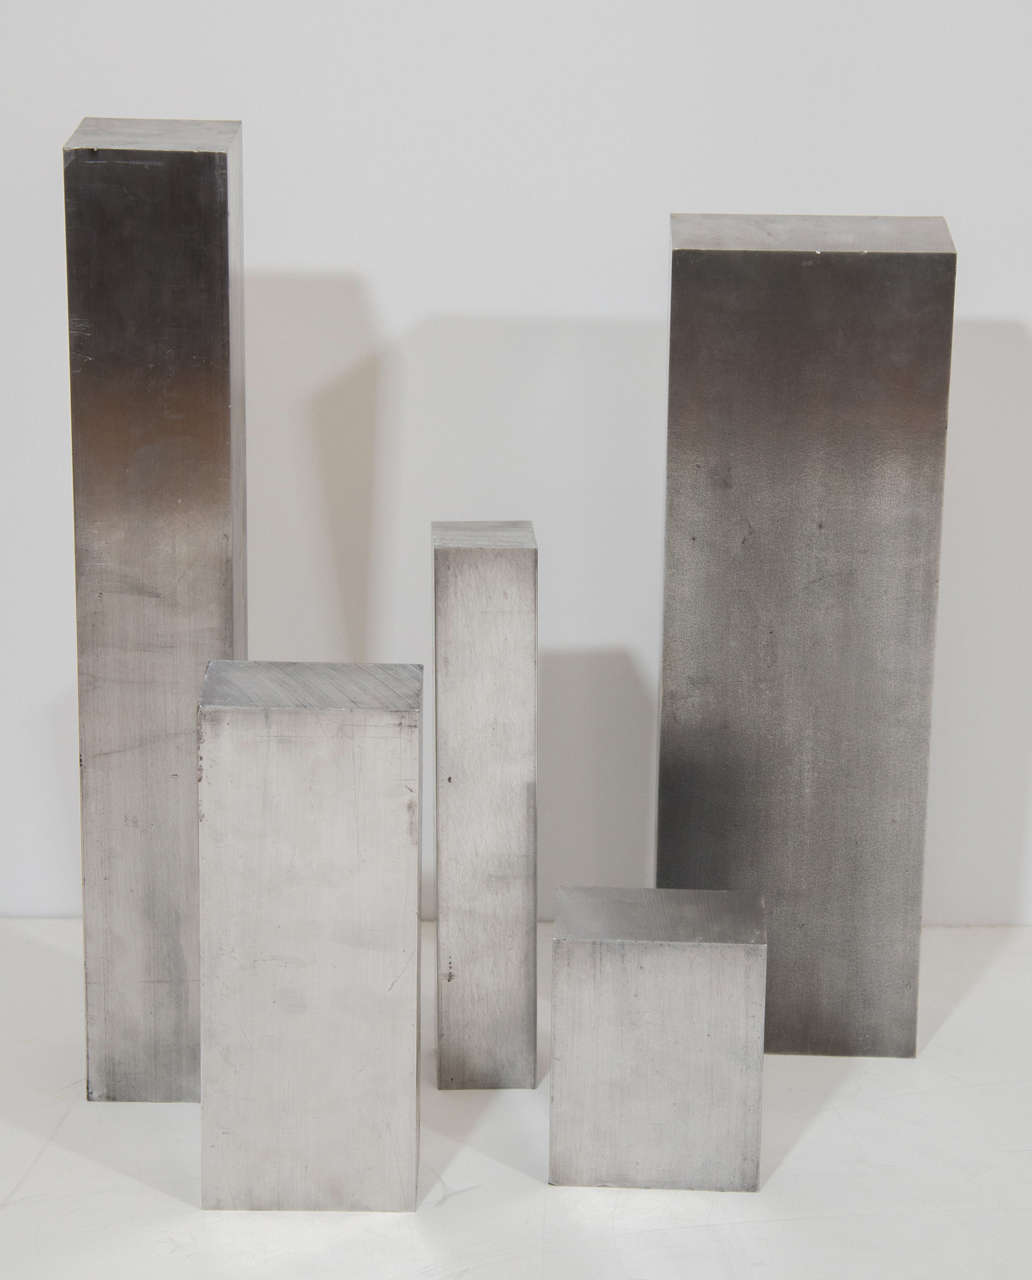 A vintage free standing steel cityscape or skyline sculpture, designed in the style of Richard Serra consisting of five free-standing buildings.Possibly used as a prototype model of a large scale sculpture.

Good vintage condition with age